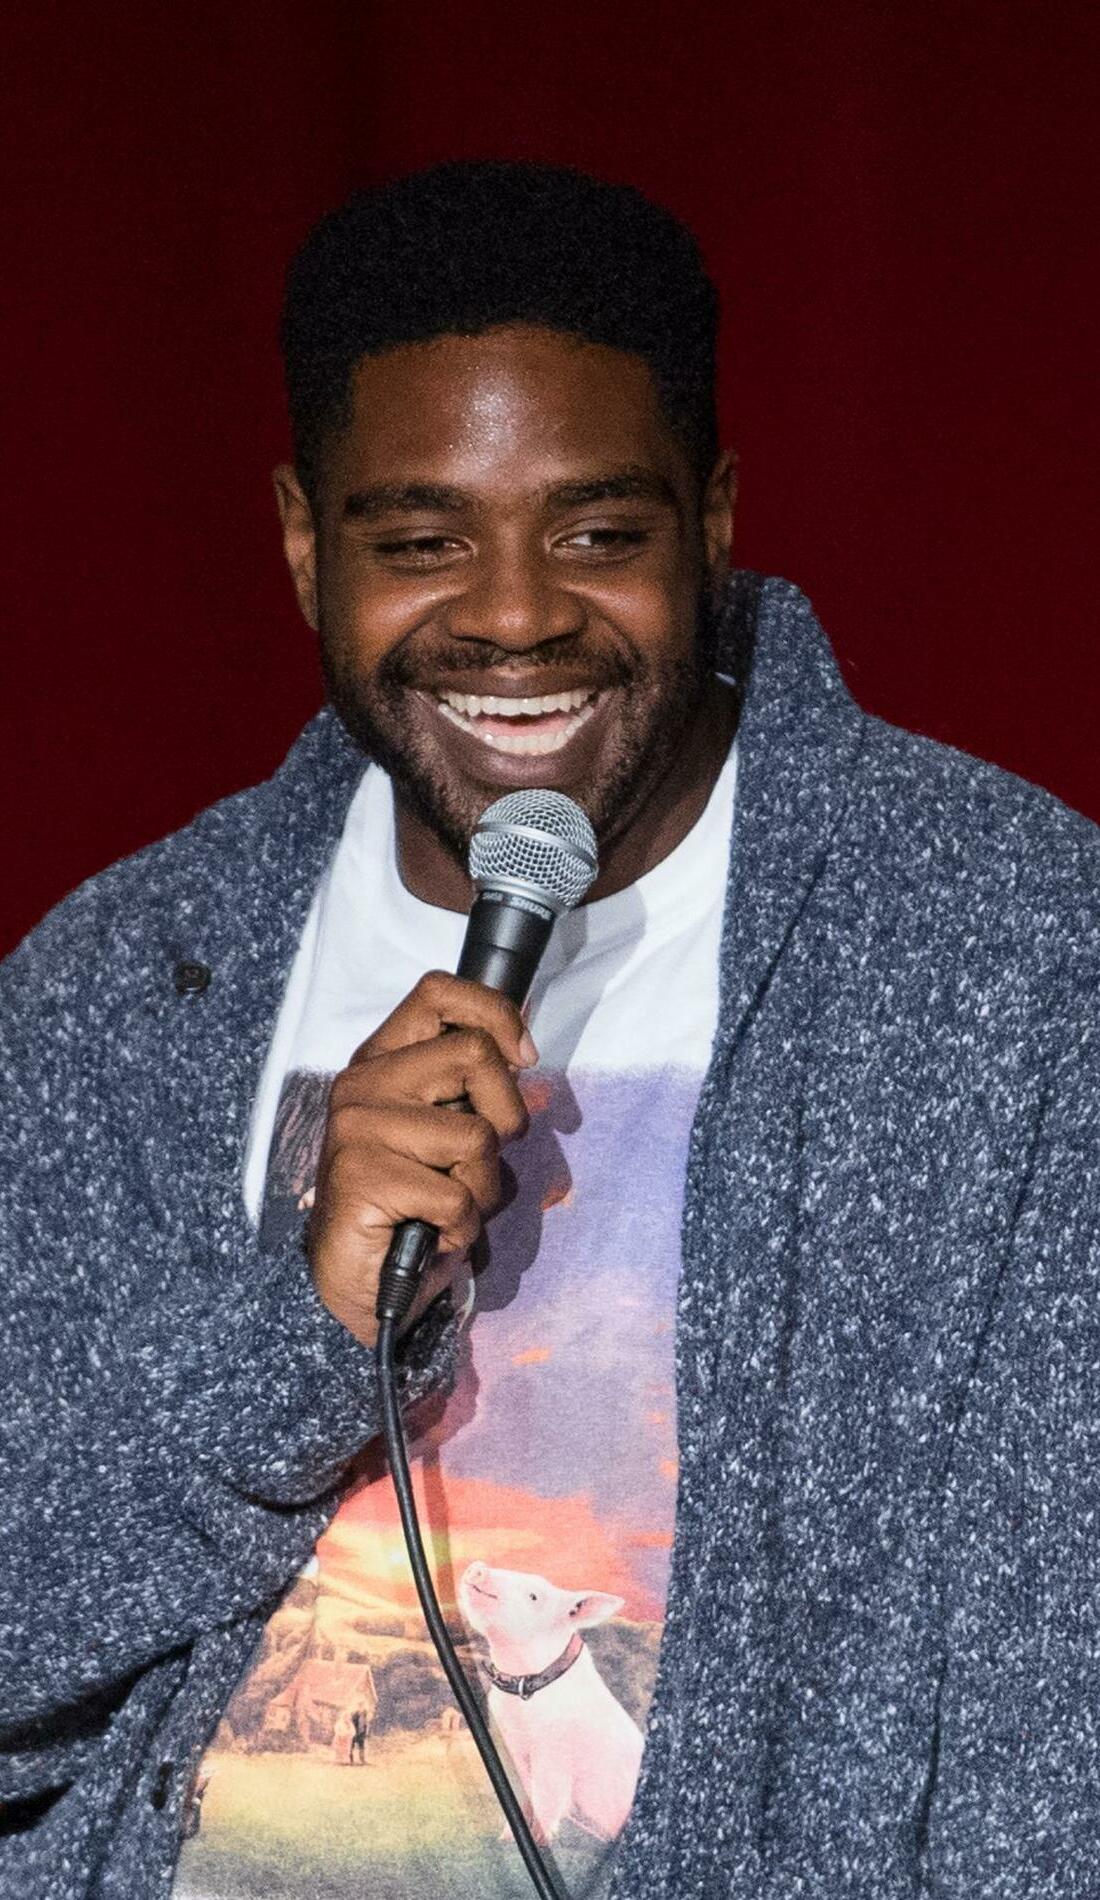 A Ron Funches live event